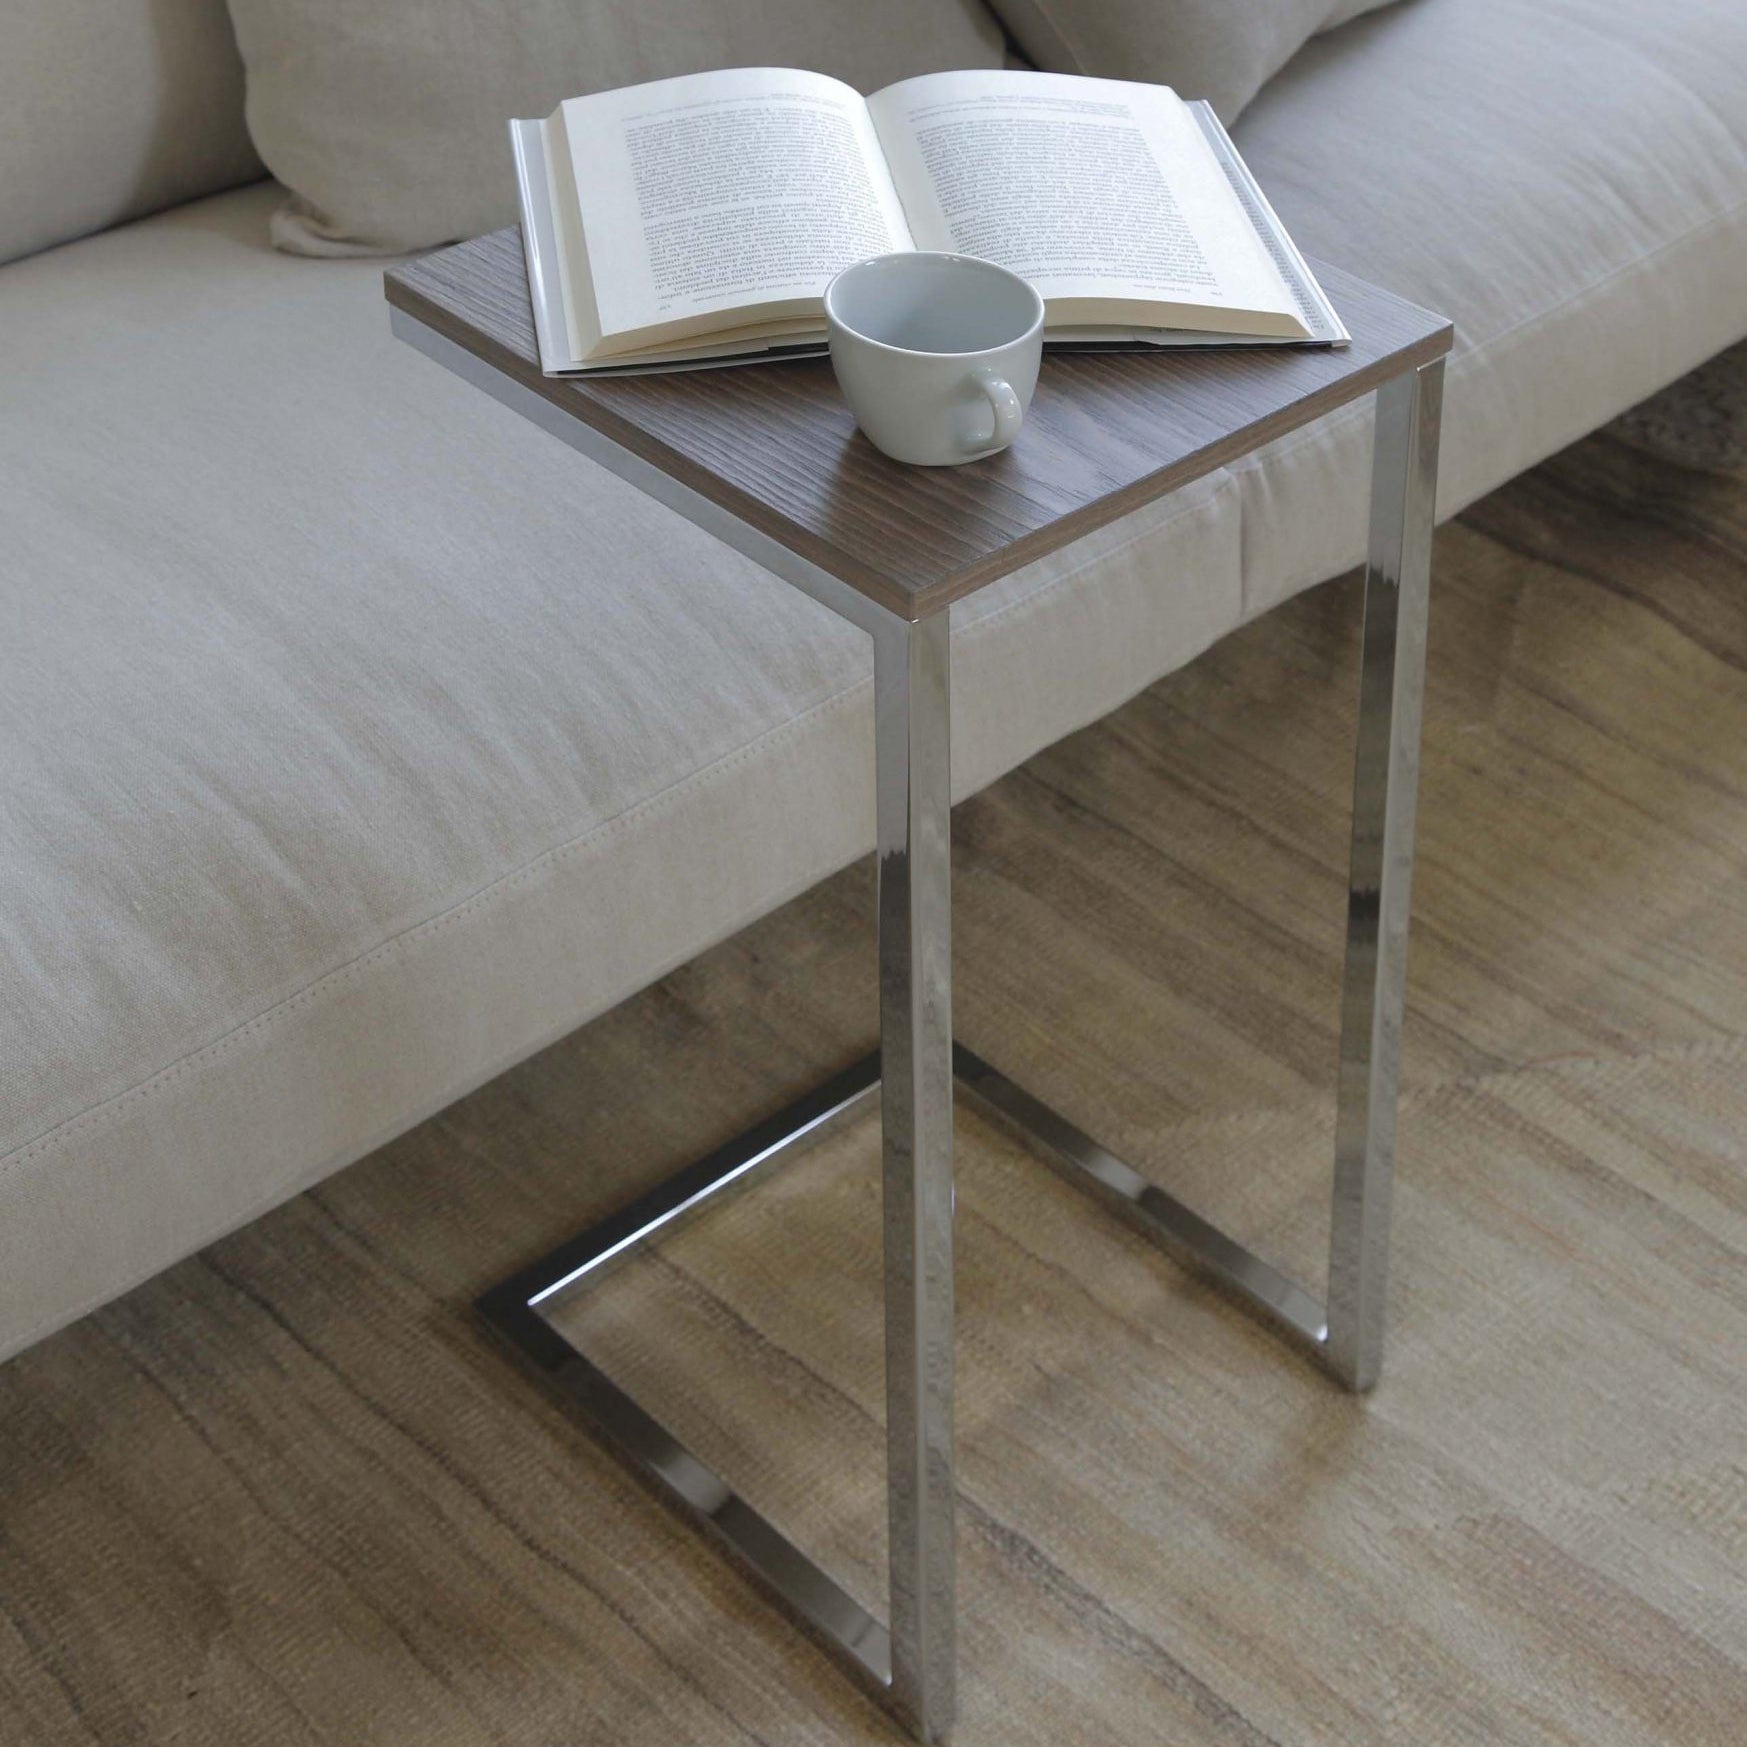 TOWER side table a